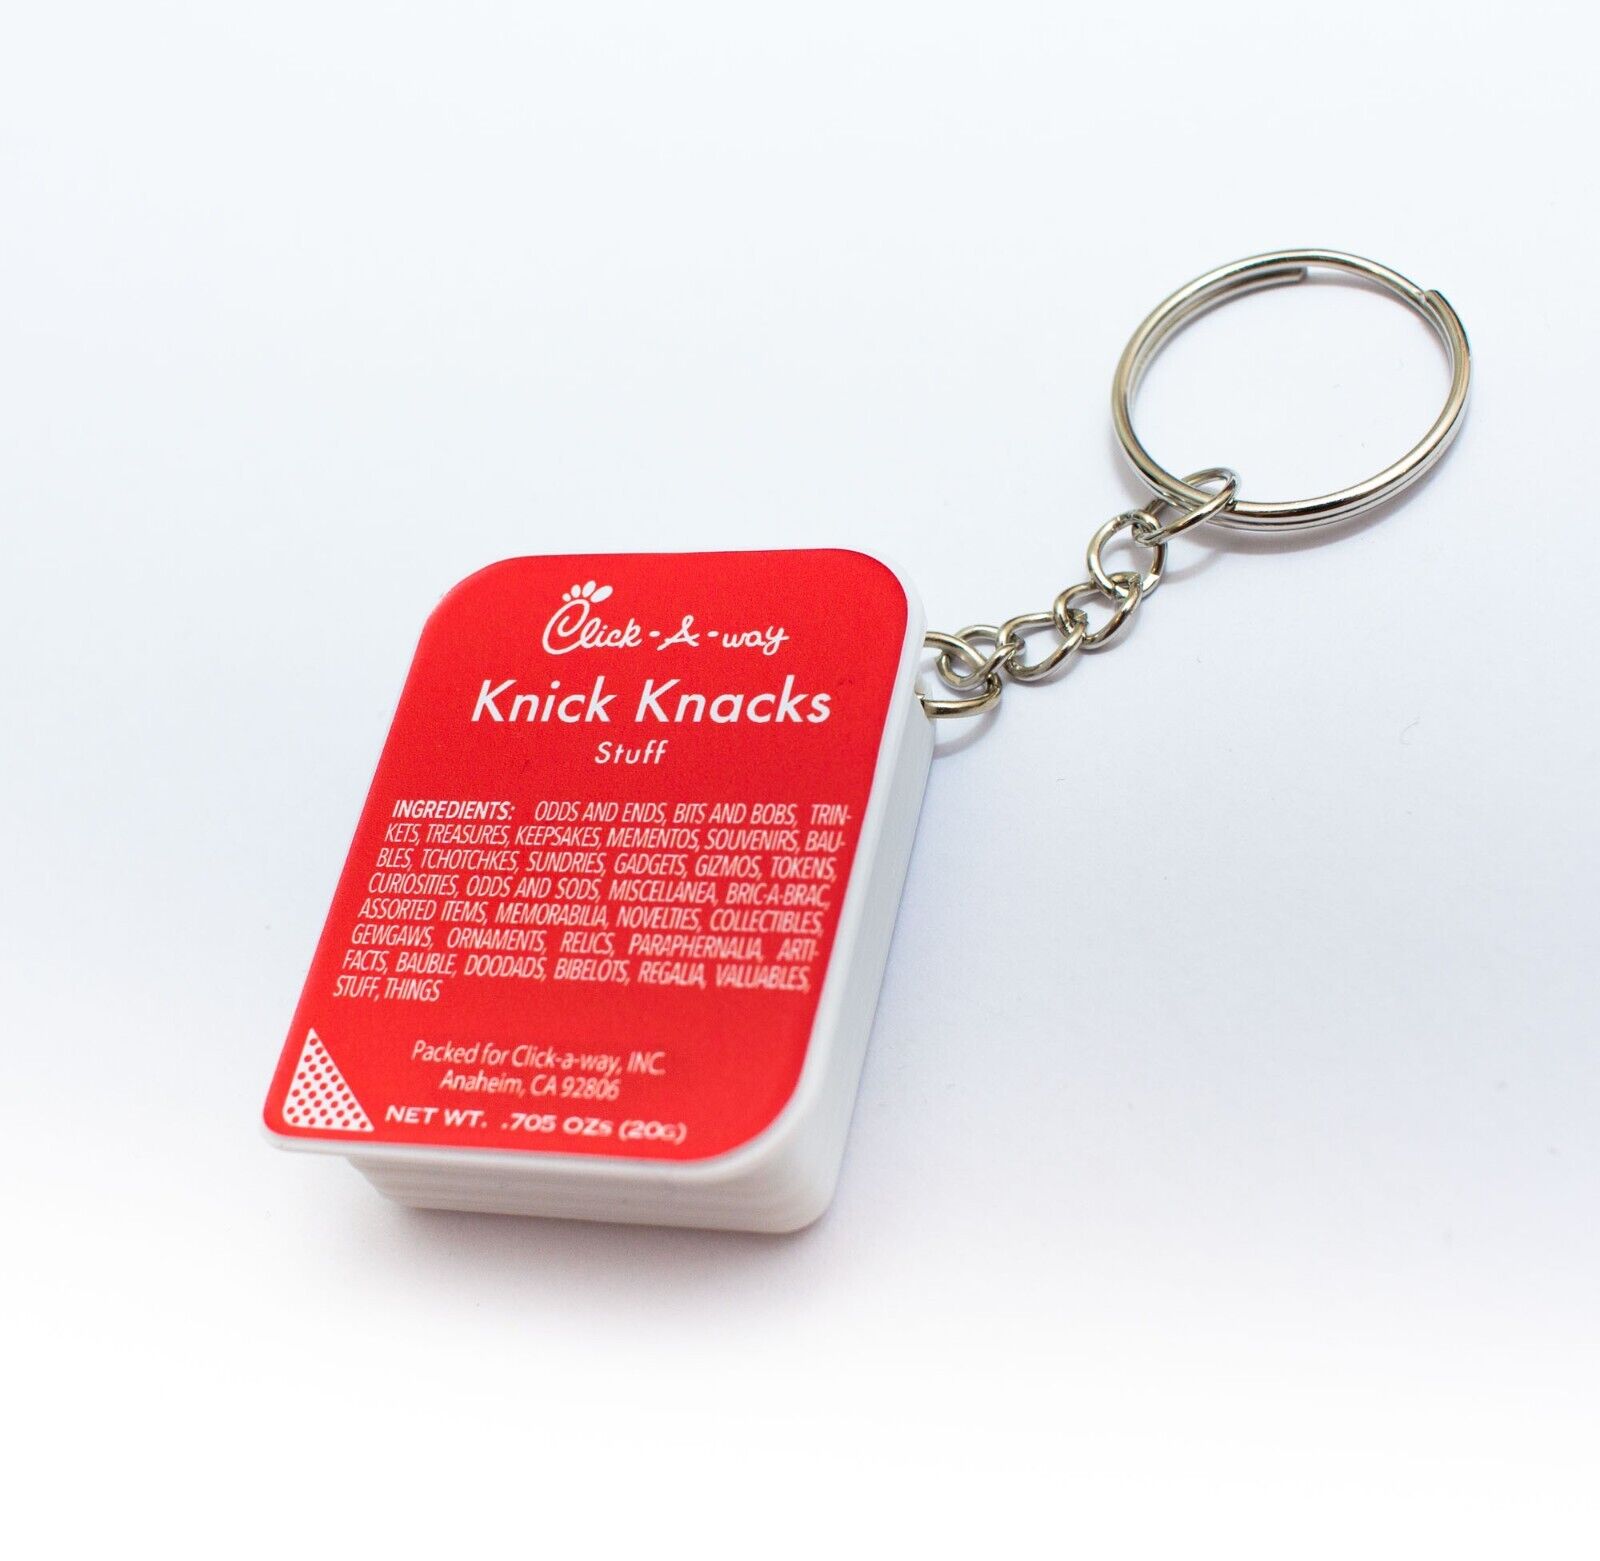 Chick-fil-a Parody CFA Sauce Keychain Container pill box 2024 NEW